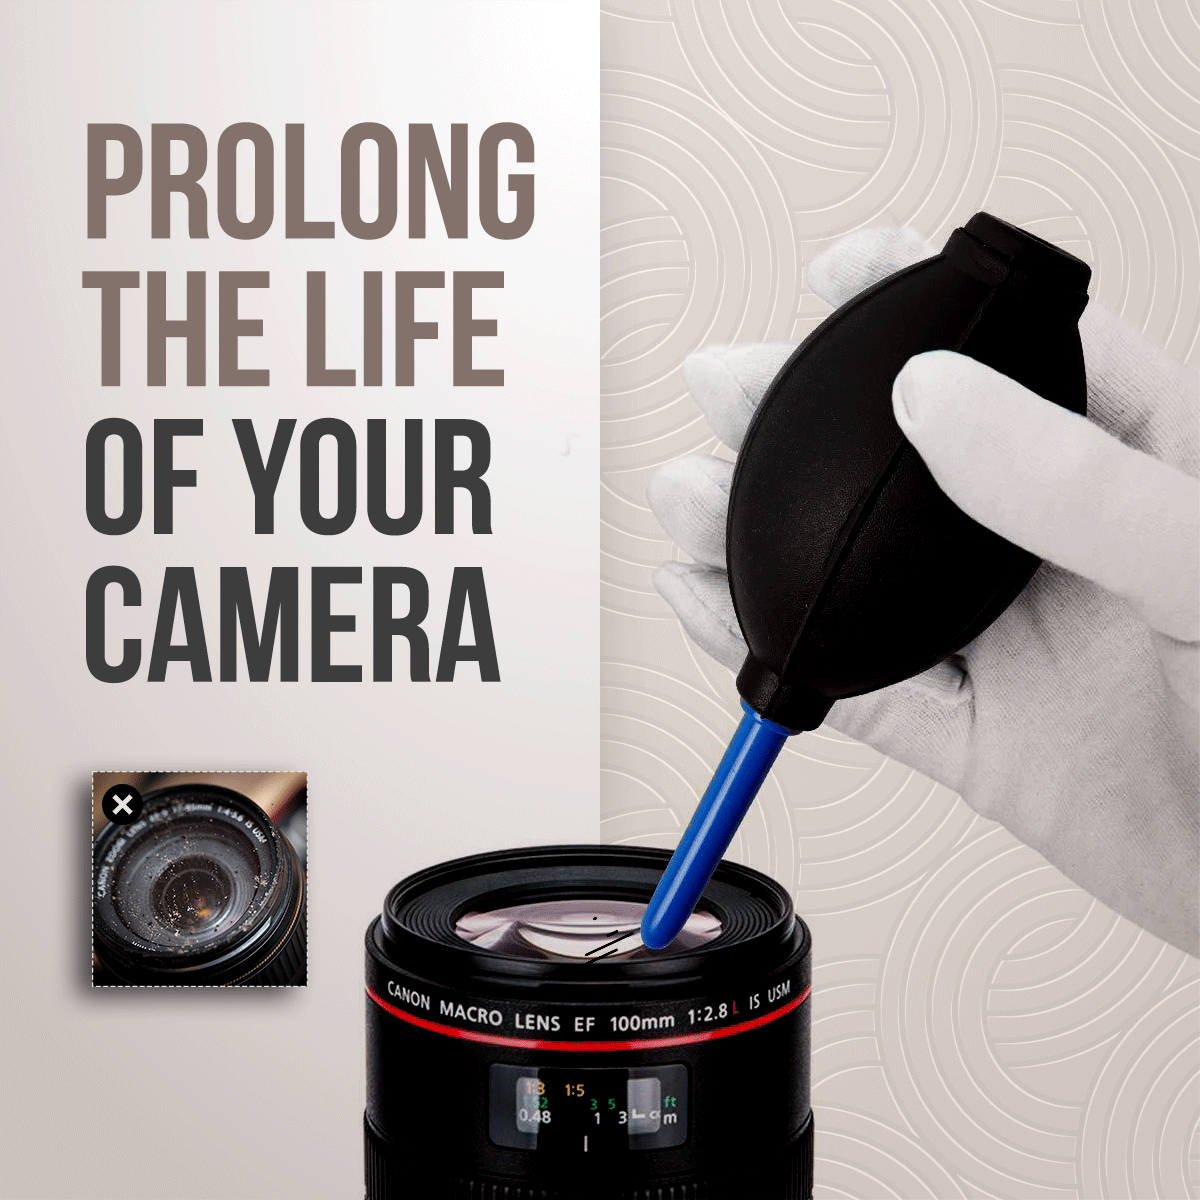 Camera Cleaning Kit Suit Dust Cleaner